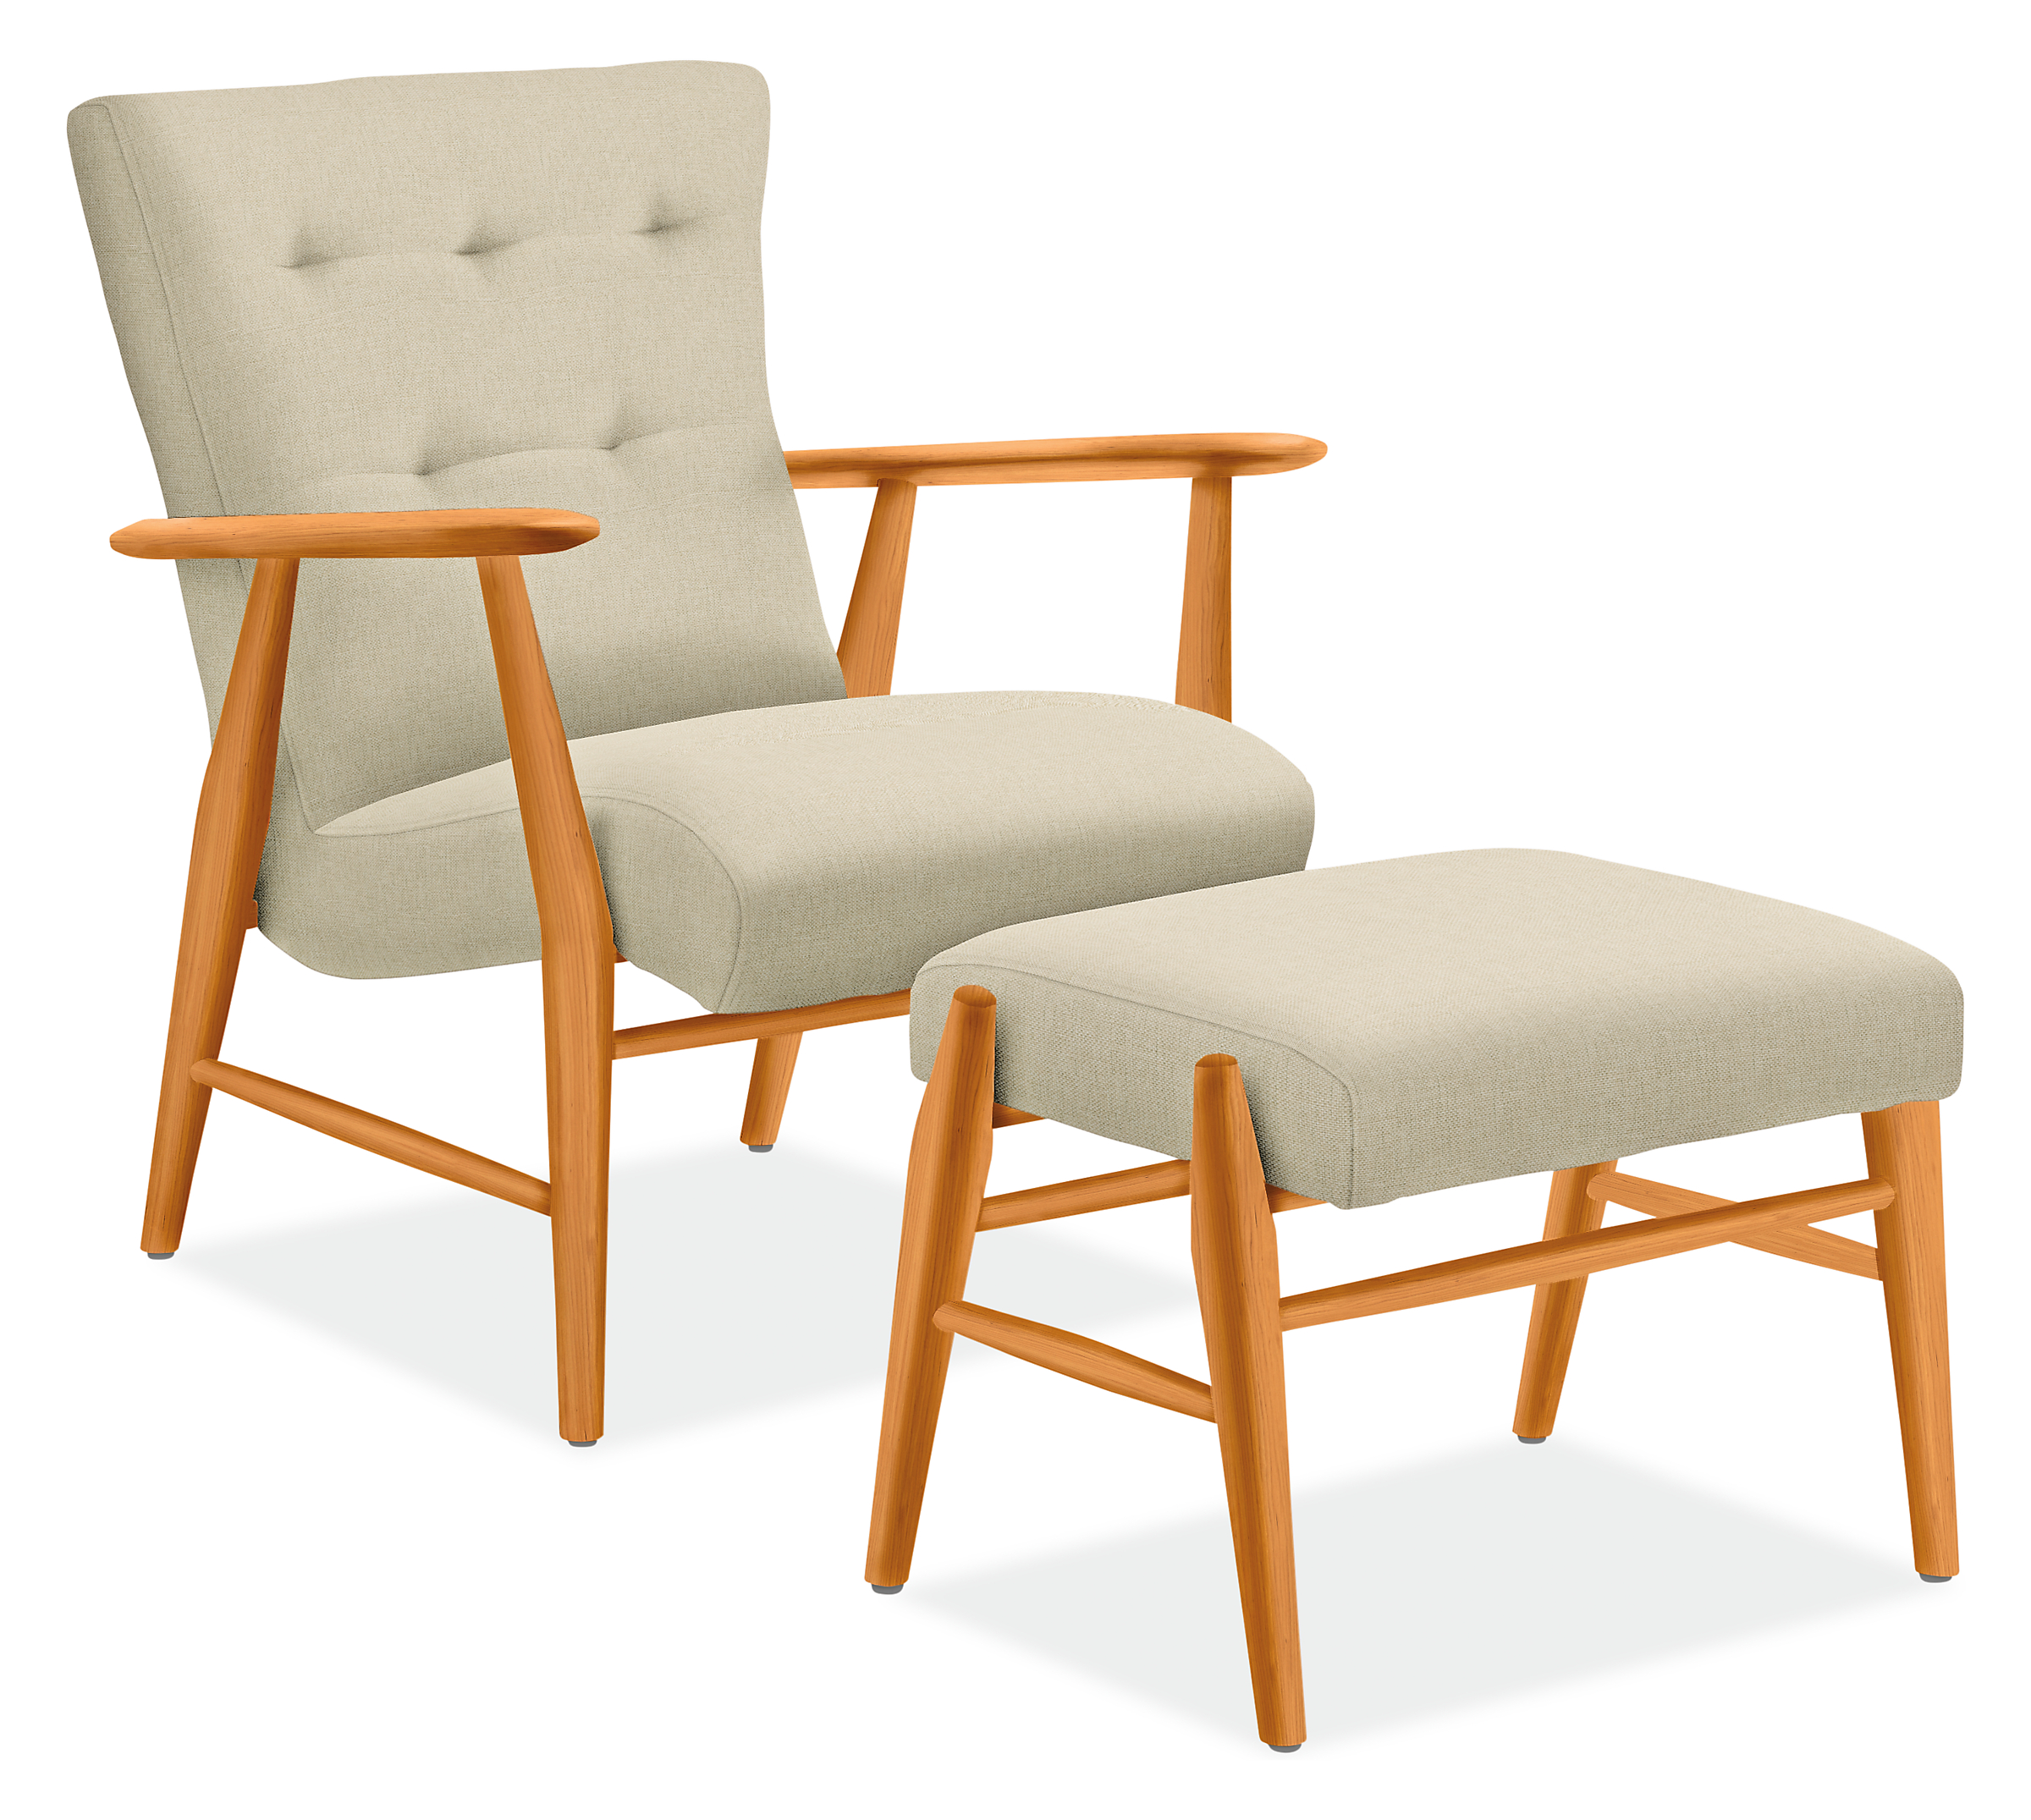 Jonas Lounge Chair and Ottoman in Sumner Fabric.